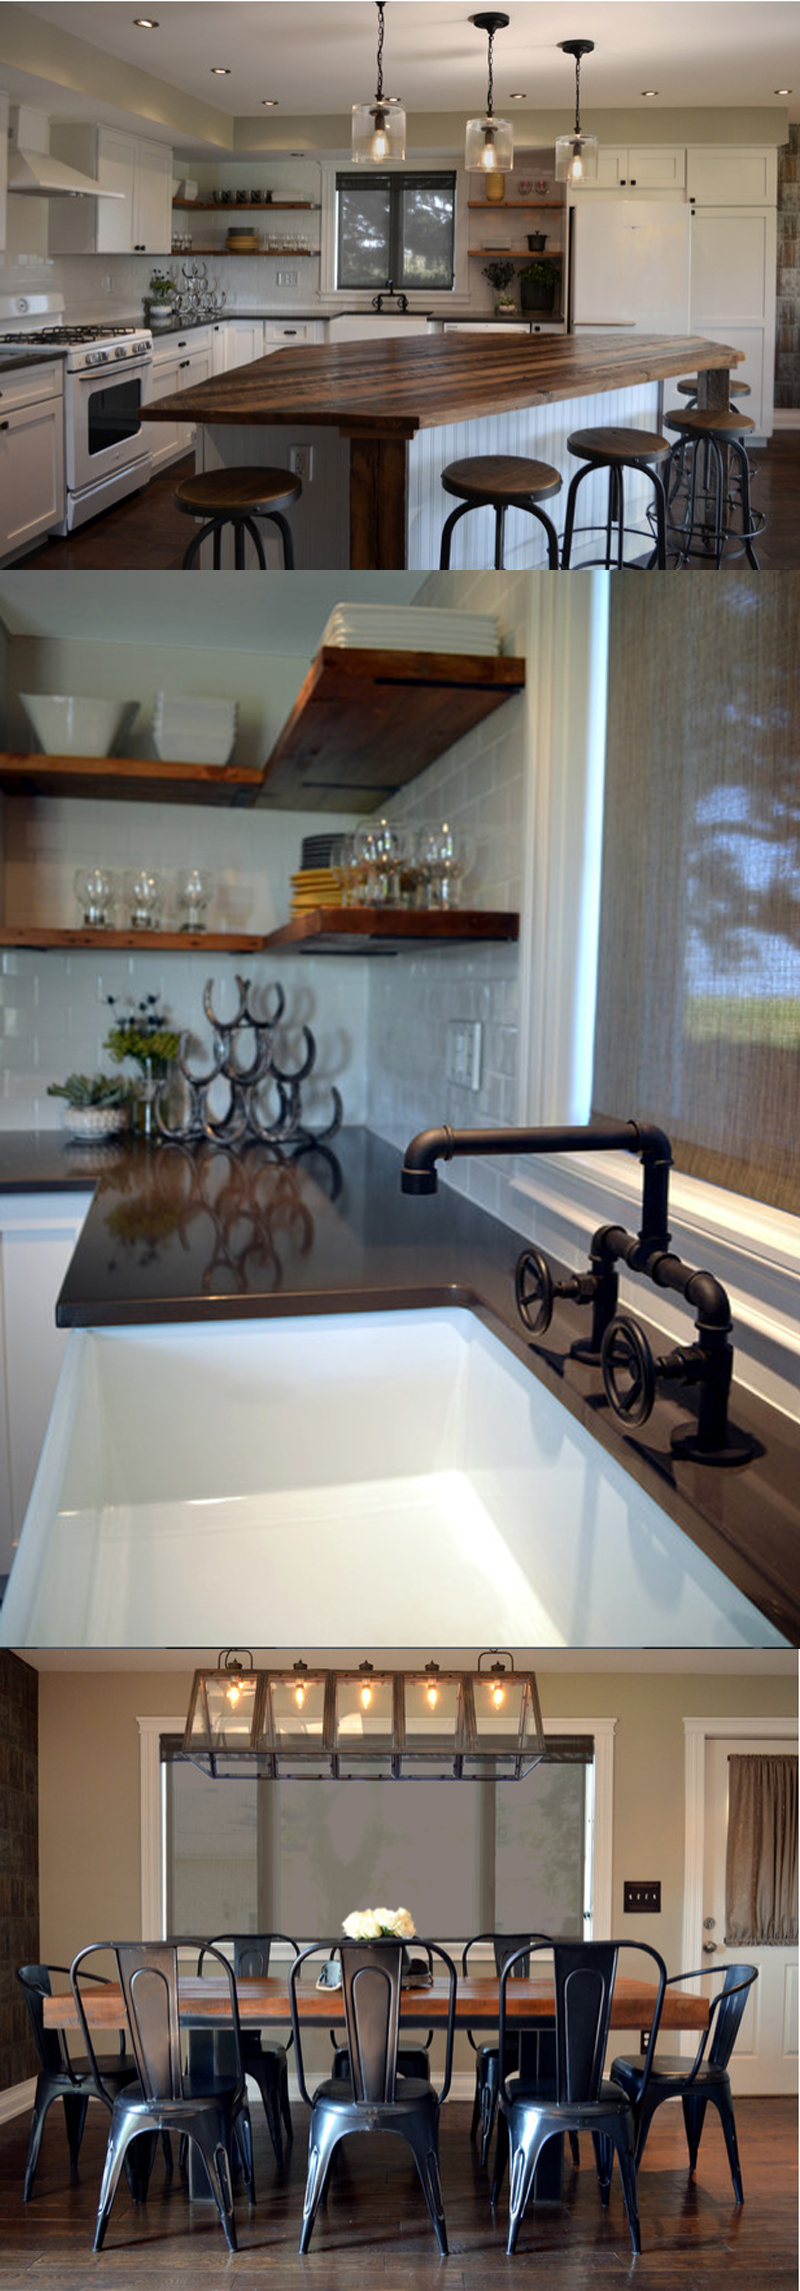 industrial style kitchen faucets